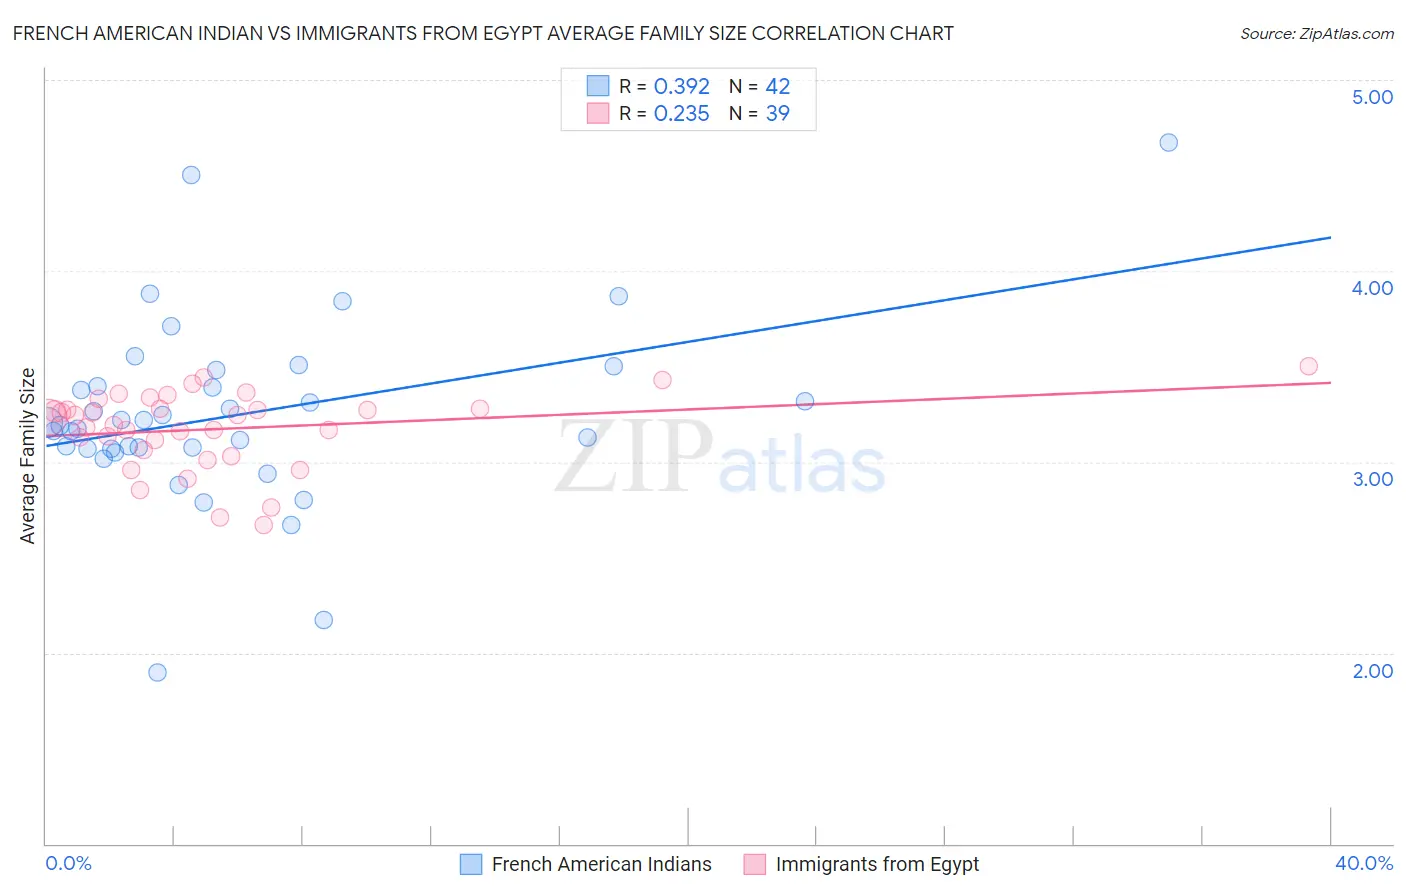 French American Indian vs Immigrants from Egypt Average Family Size